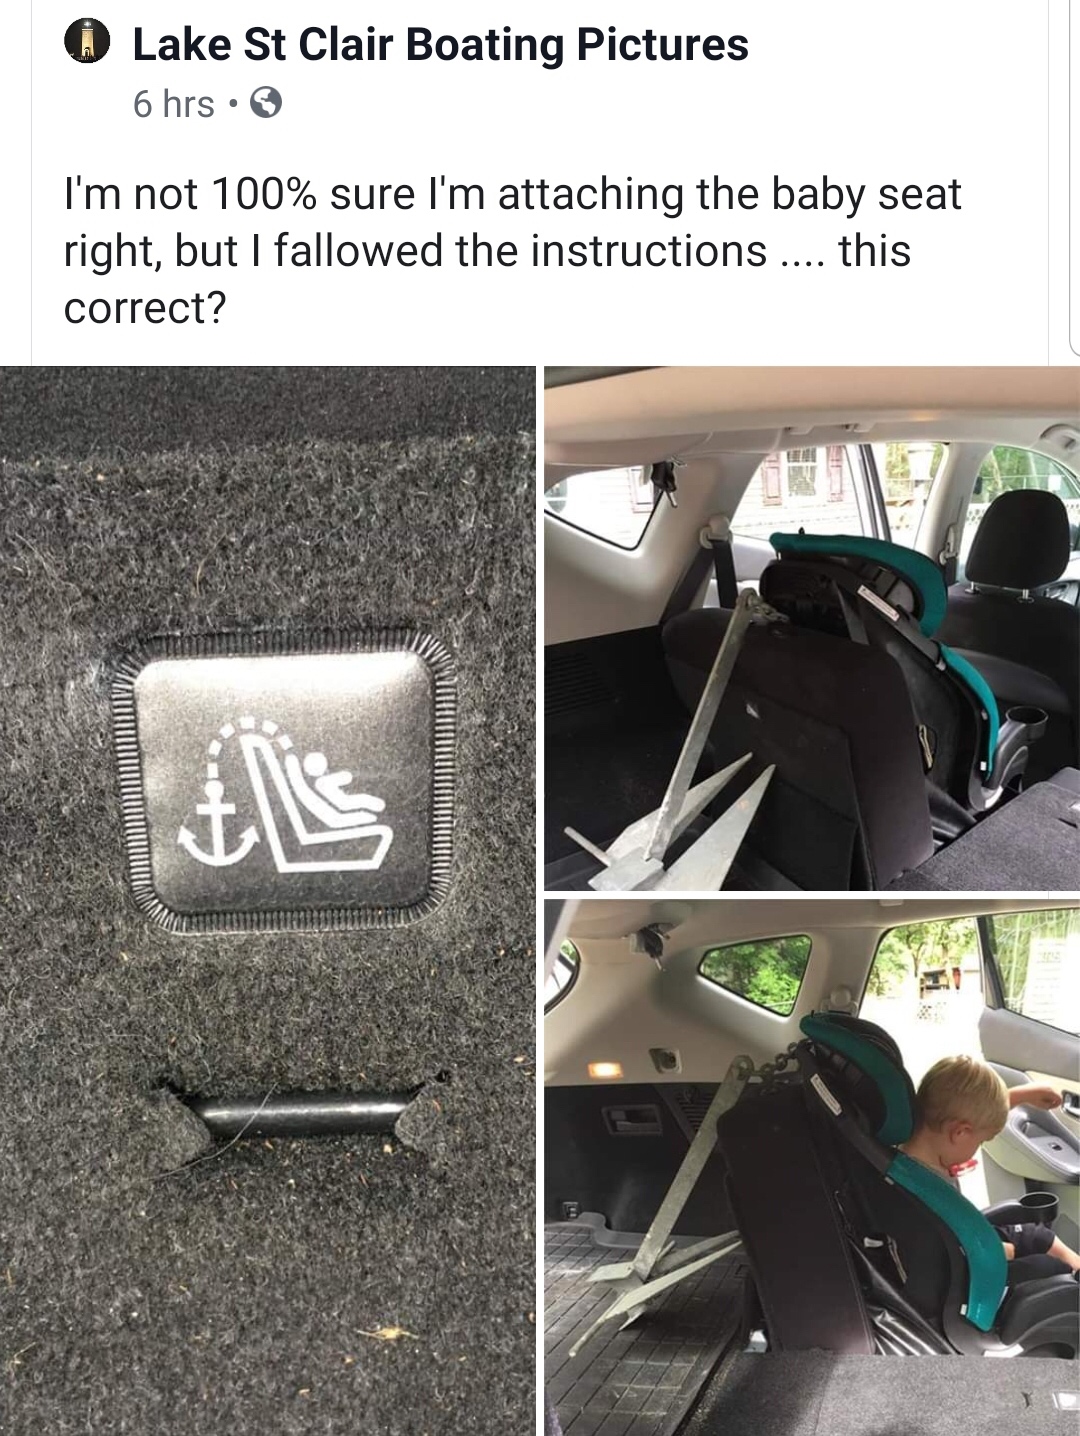 O Lake St Clair Boating Pictures 6 hrs. I'm not 100% sure I'm attaching the baby seat right, but I fallowed the instructions .... this correct?